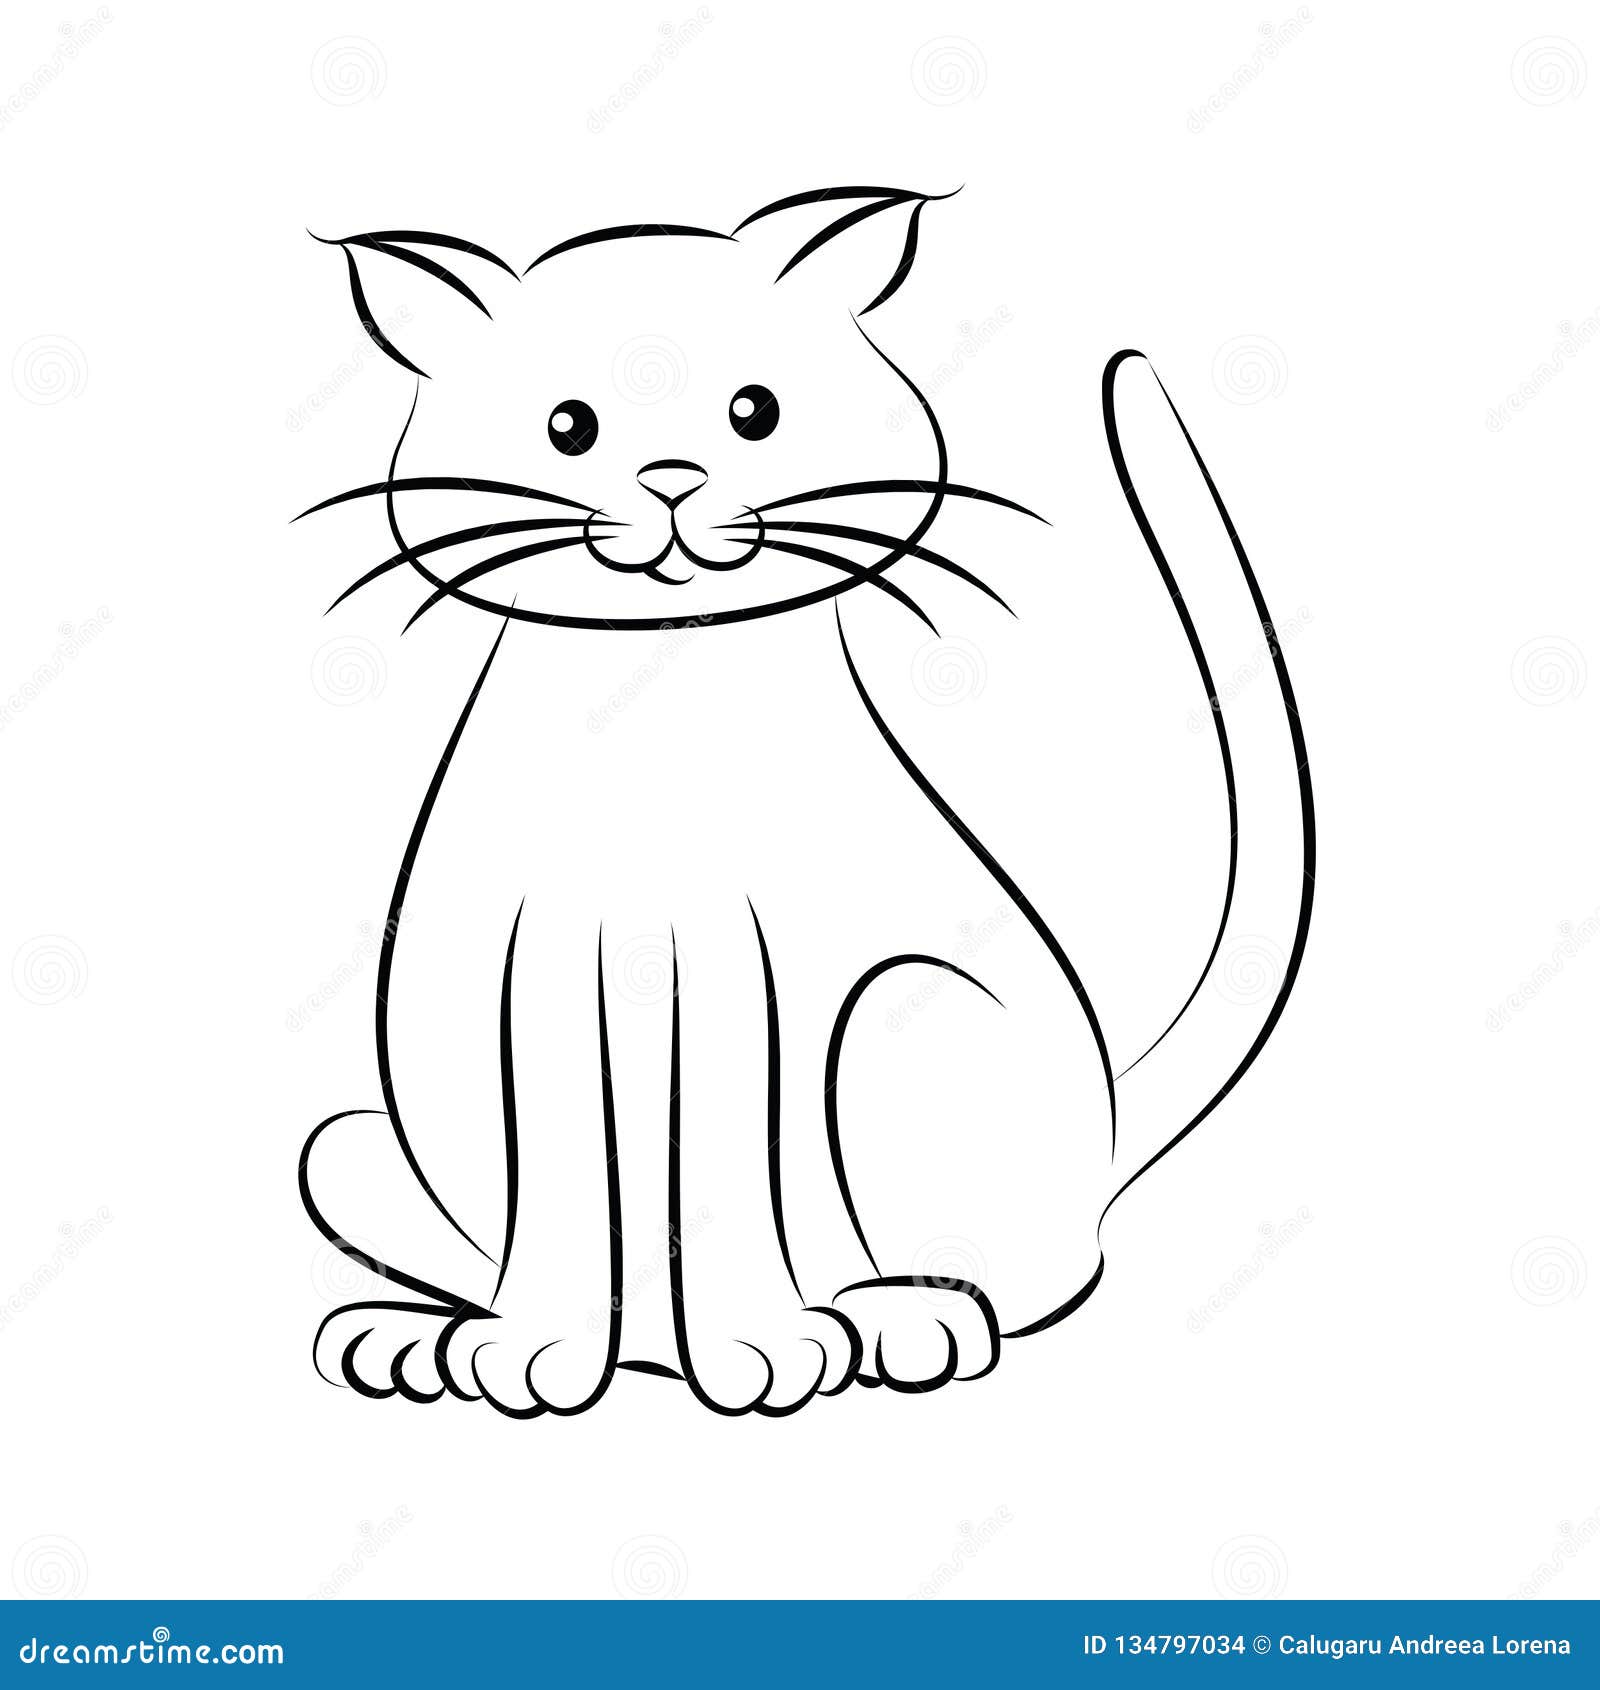 Download Cartoon Cute Cat Coloring Page Stock Vector Illustration Of Adorable Eyes 134797034